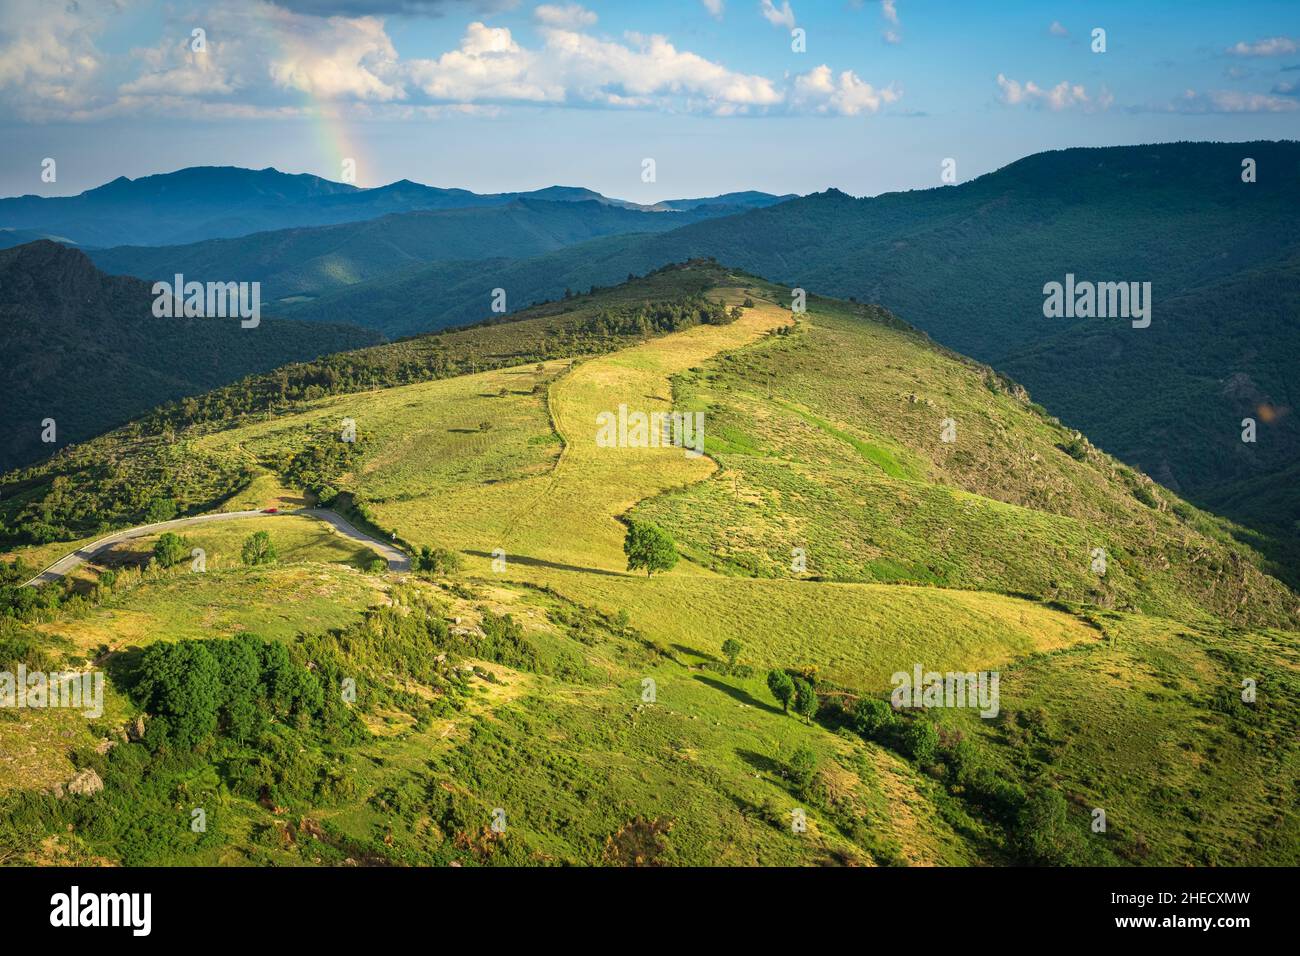 France, Lozere, Corniche des Cevennes, former Royal road from Nimes to Saint-Flour, Aultre field in the surroundings of Le Pompidou village Stock Photo